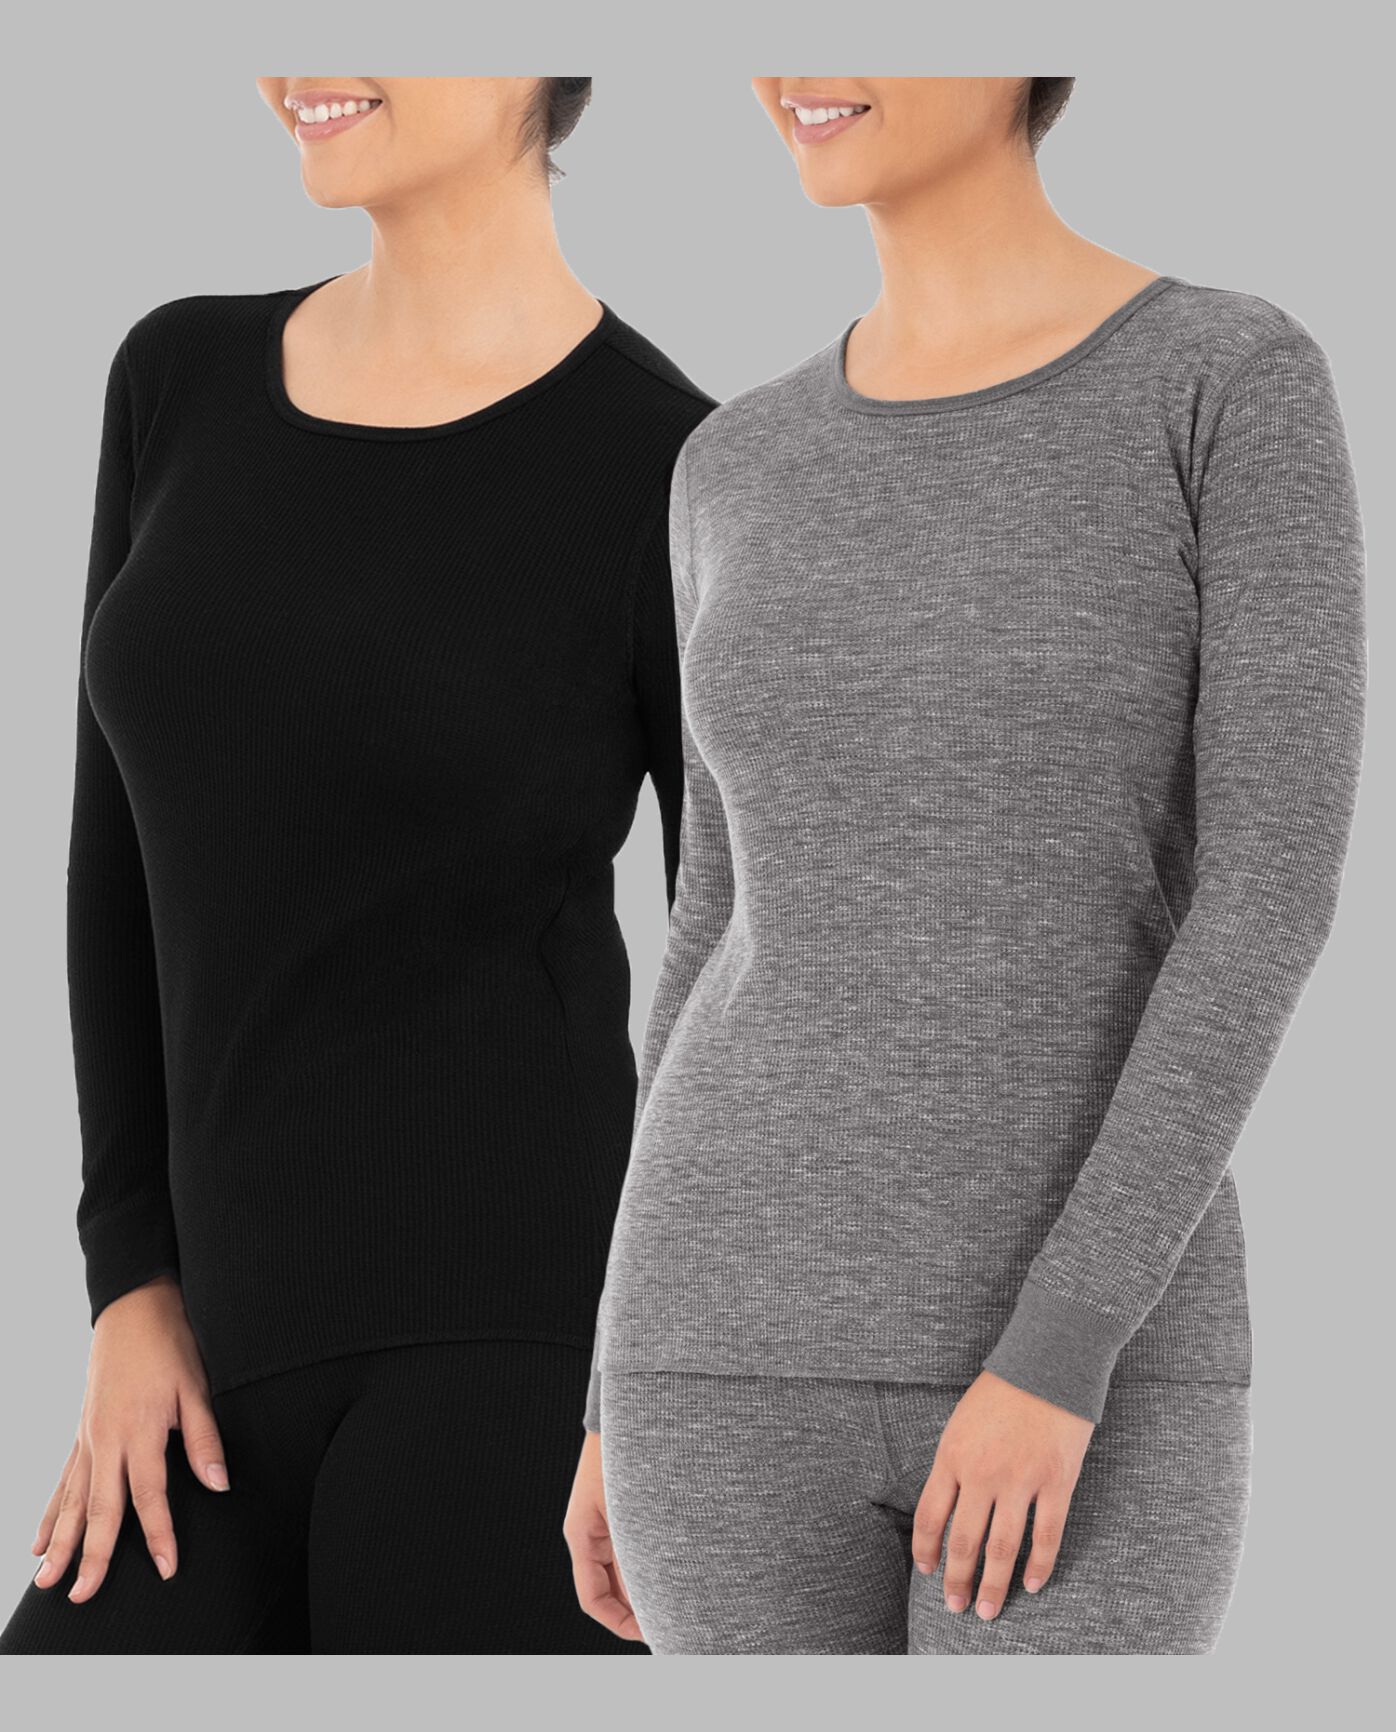 Women's Thermal Crew Top, 2 Pack BLACK/SMOKE INJECTION HEATHER